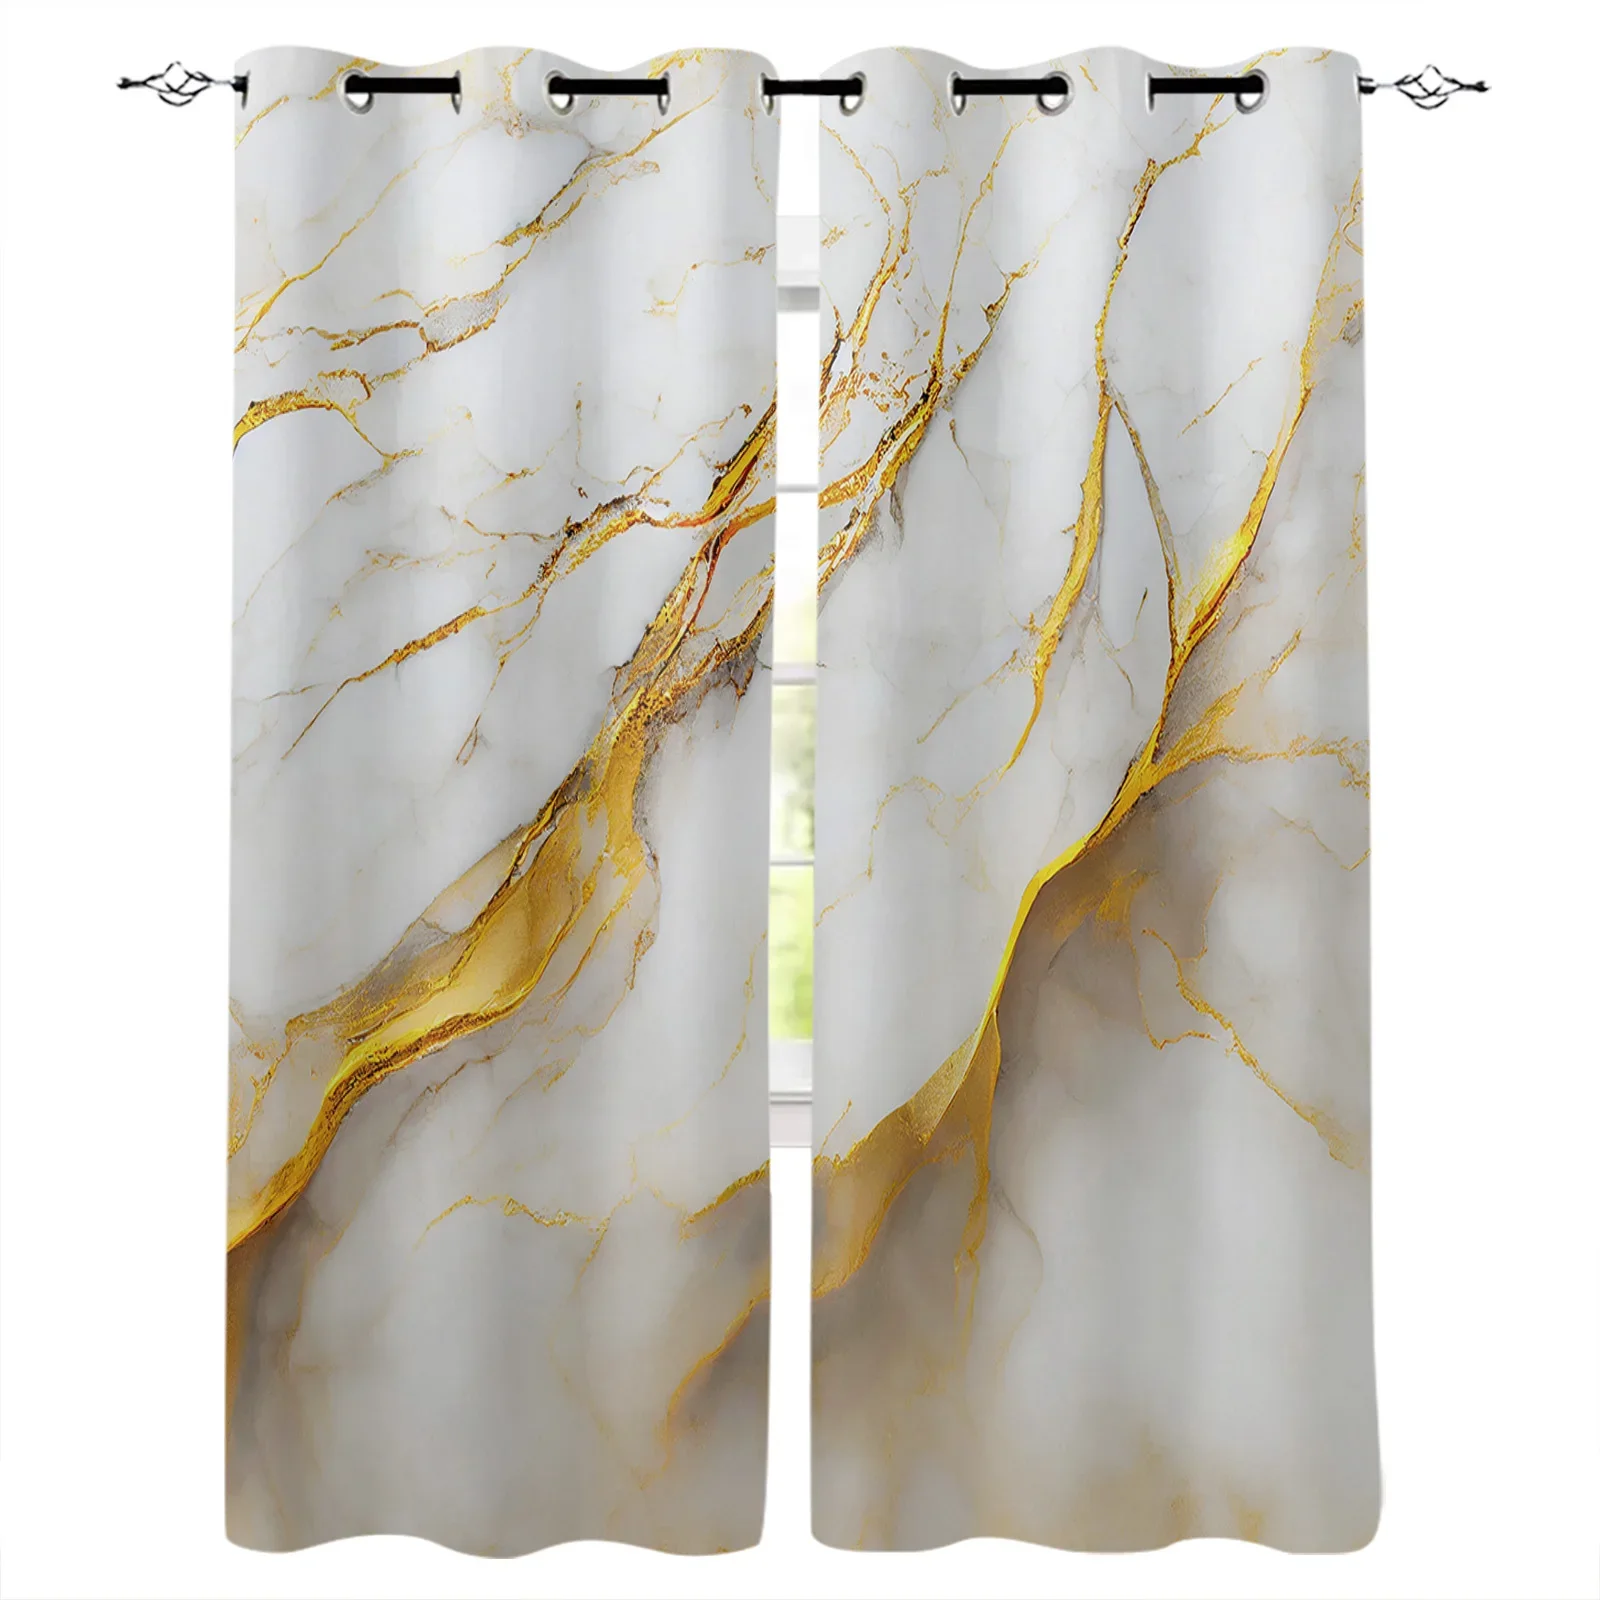 

Marble Texture White Curtains for Living Room Kids Bedroom Blinds Windows Curtain Balcony Hall Custom Drape Long Cortinas